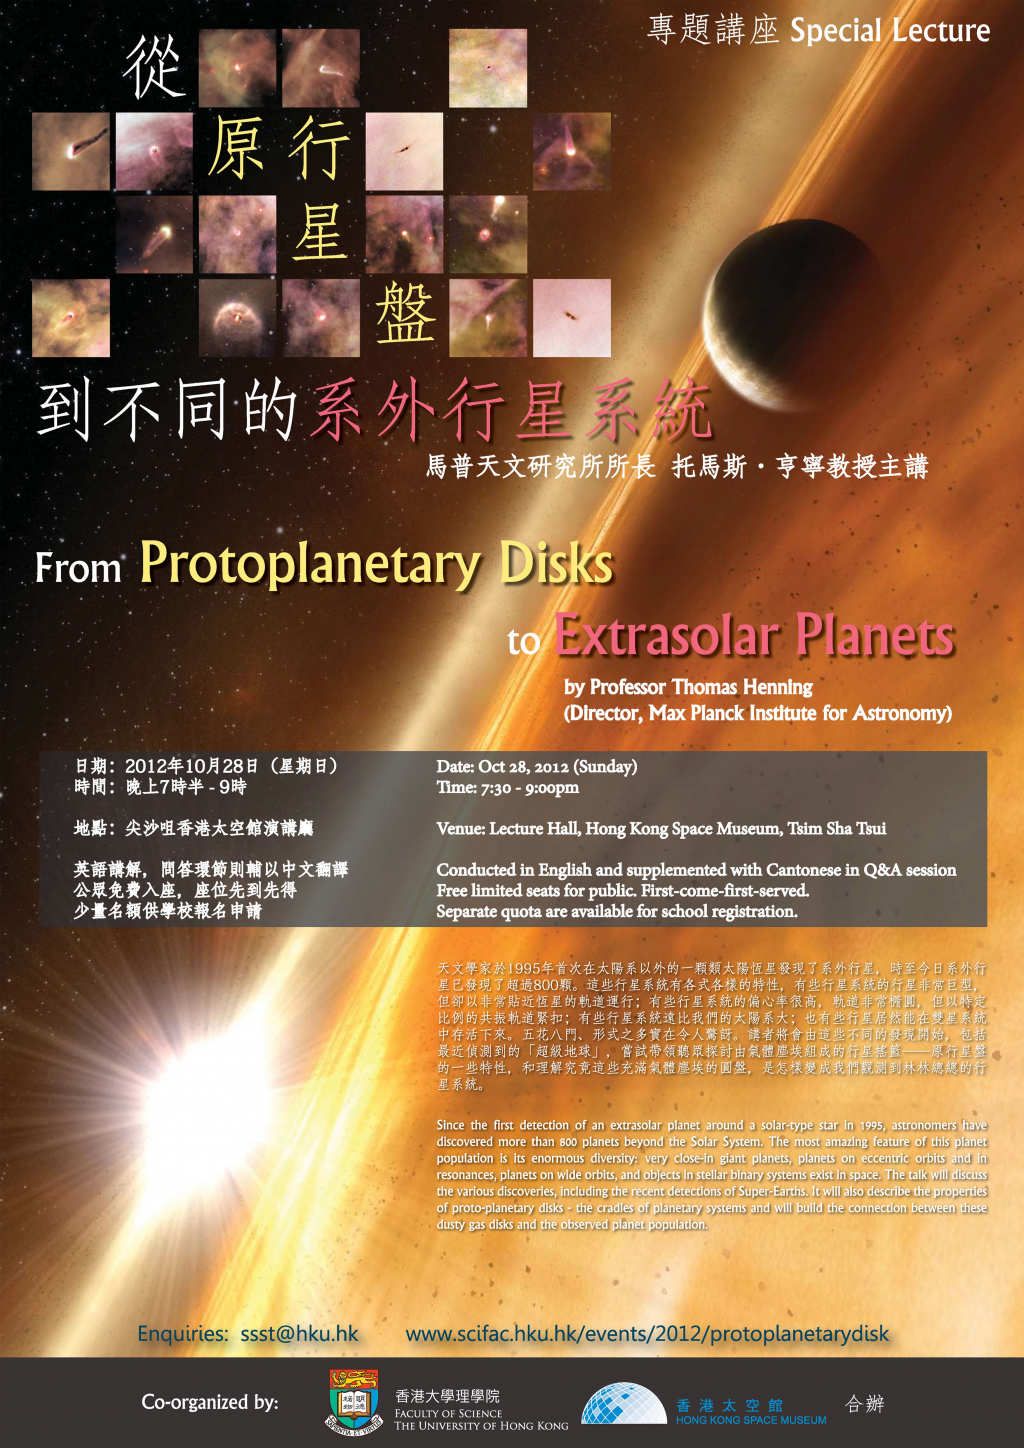 Science Public Lecture - From Protoplanetary Disks to Extrasolar Planets 